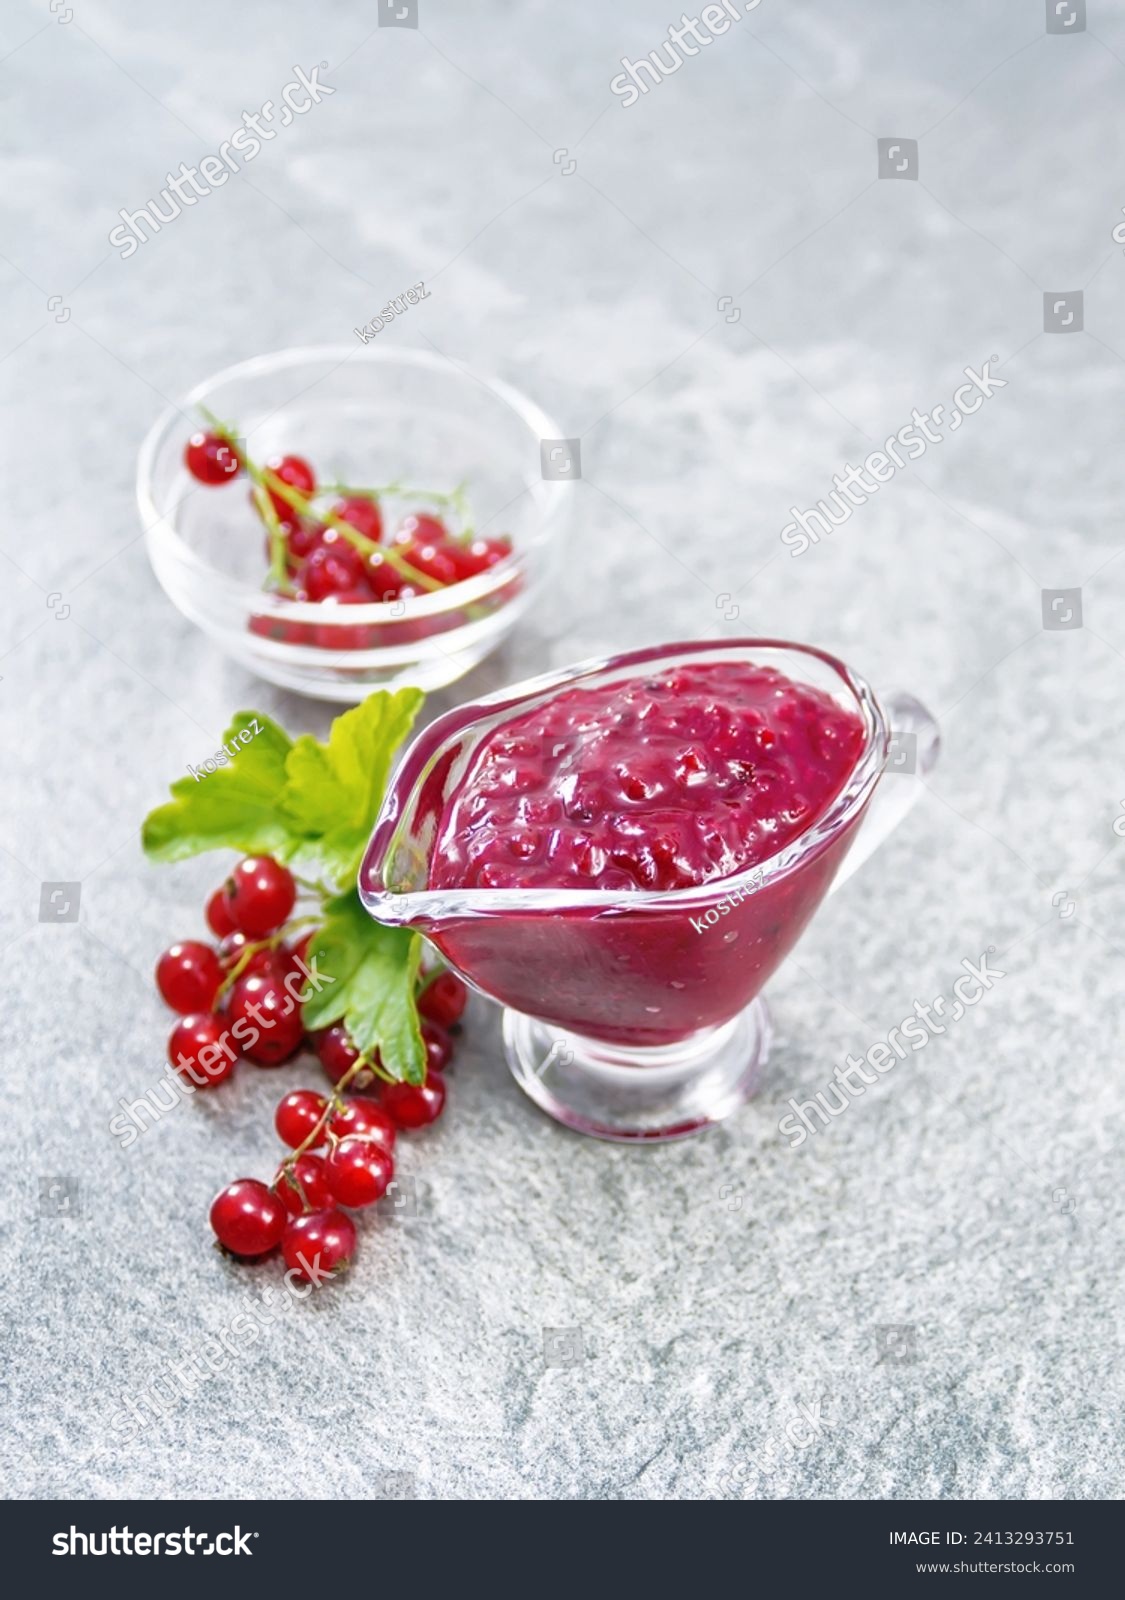 Red currant sauce in a glass sauceboat, berries in a bowl and on the table against the background of a granite table #2413293751